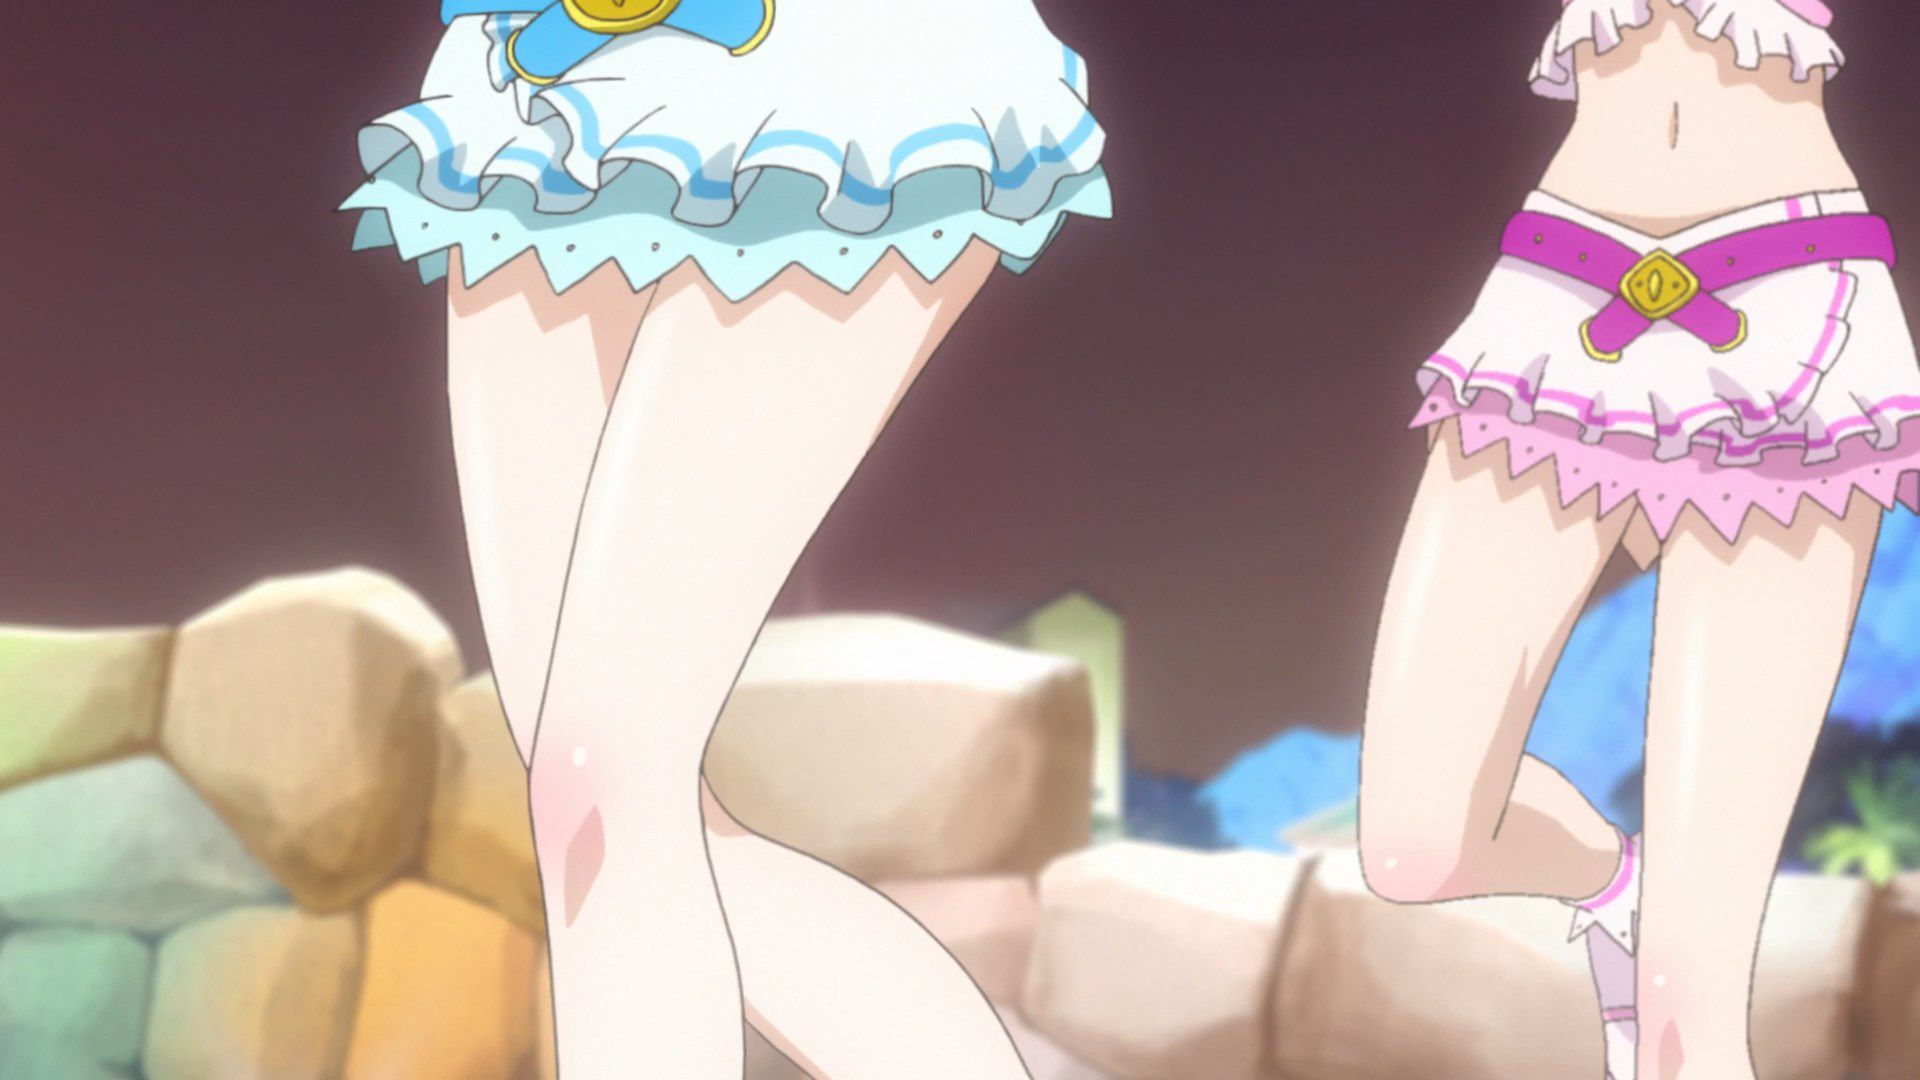 [God images] "love live! ' Μm ' PV's leg is too erotic everyone wakes up to a leg fetish of wwwww 55